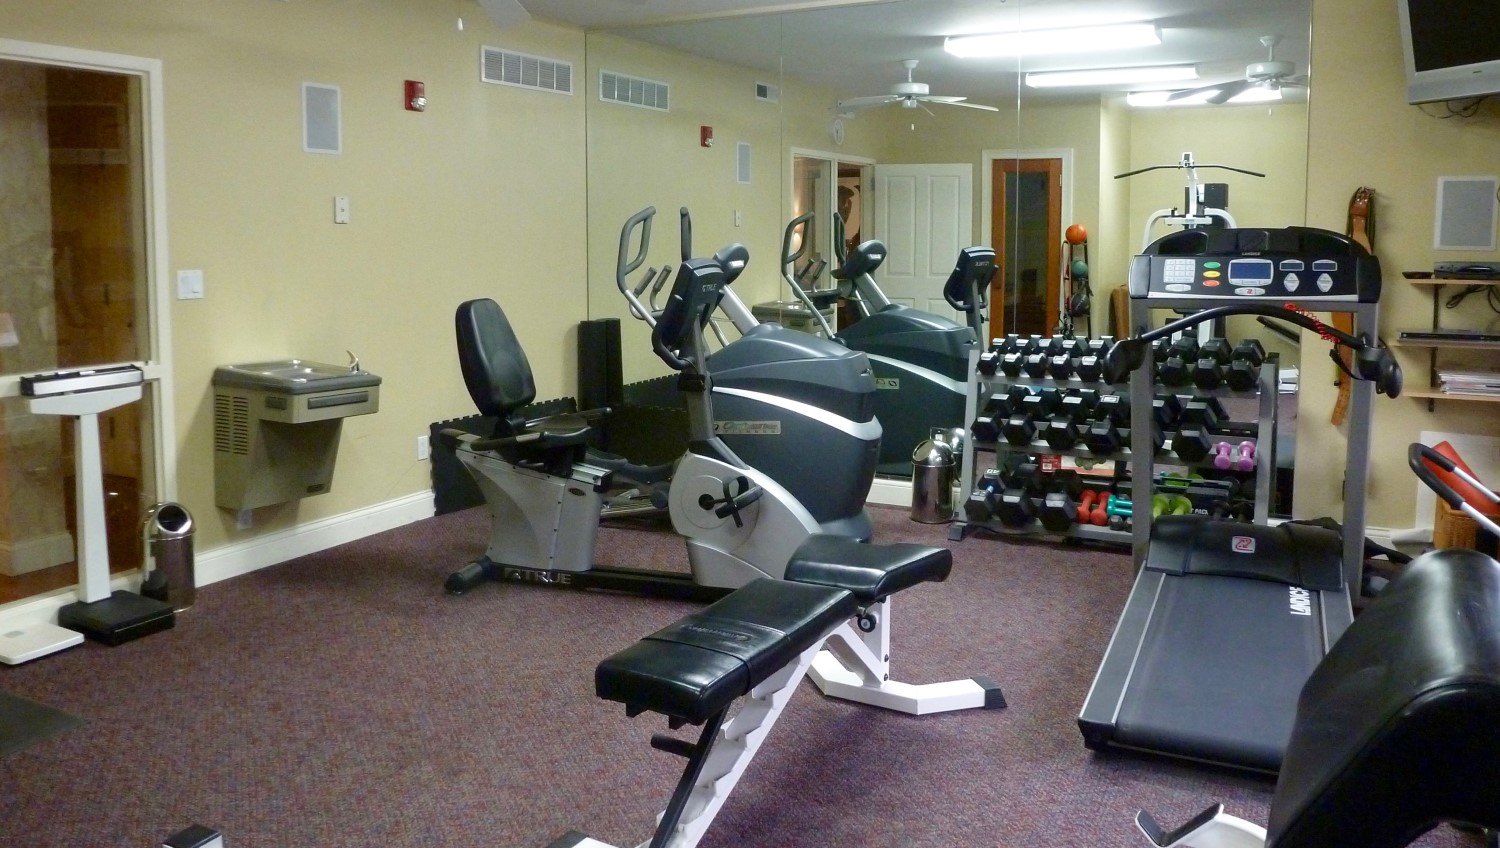   On-site Fitness Center complete with Sauna.  